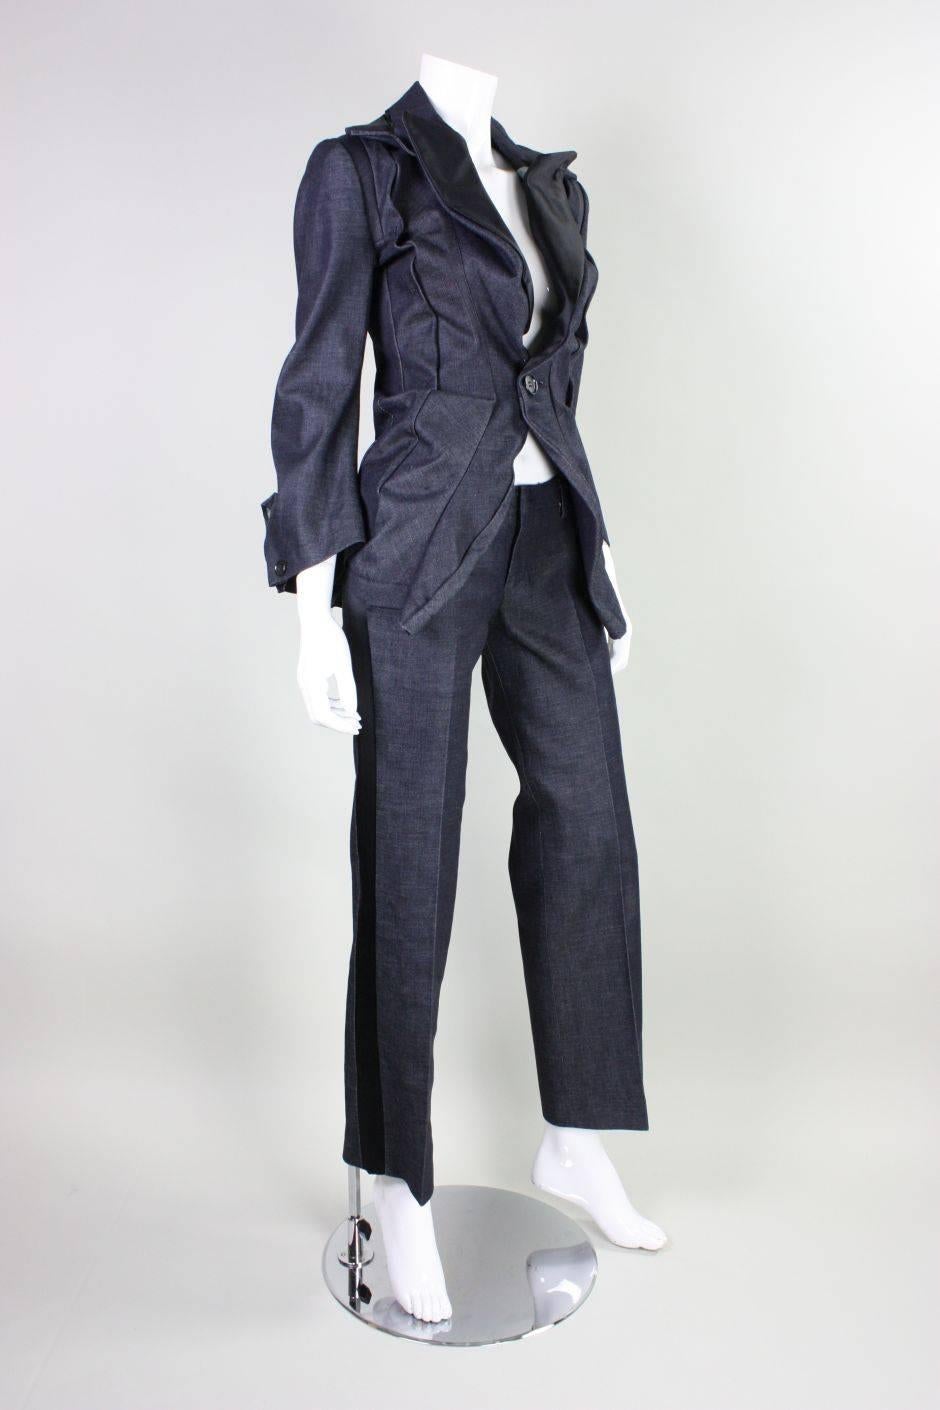 Contemporary ensemble from Junya Watanabe for Comme des Garcons dates to 2006 and is made of dark blue cotton denim with black polyester/silk blend trim.  Jacket is single breasted and has one button closure at the waist.  Sleeves have openings at